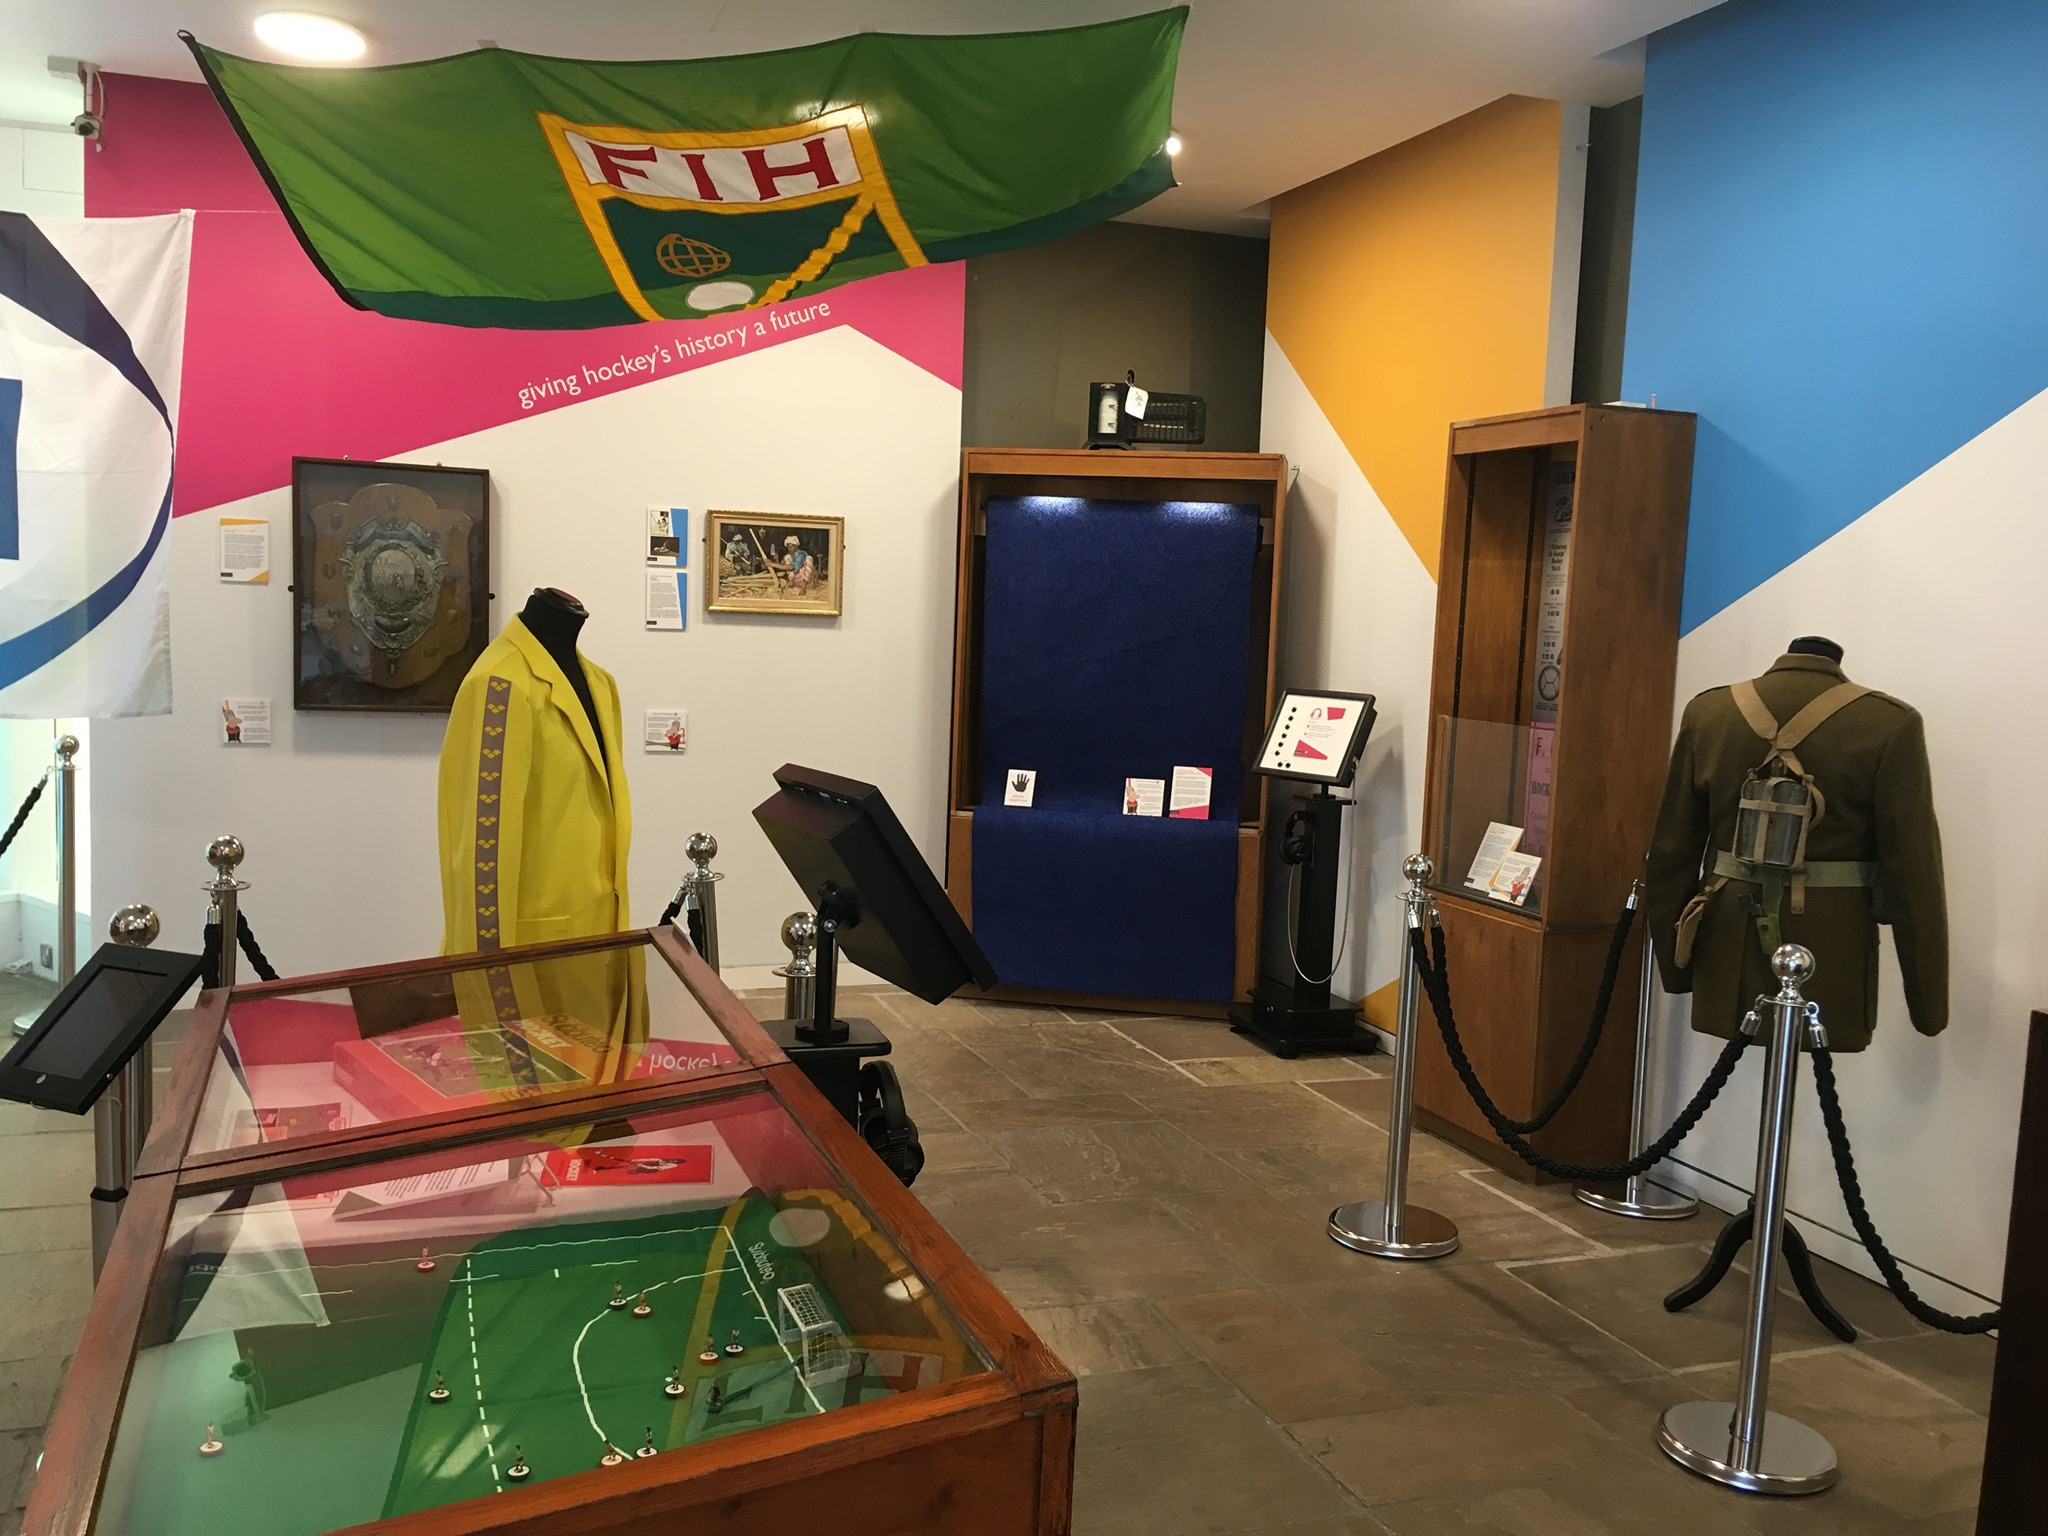 The Hockey Museum, based in Woking in England, hopes to be able to share more of its exhibits with a mobile project ©The Hockey Museum 